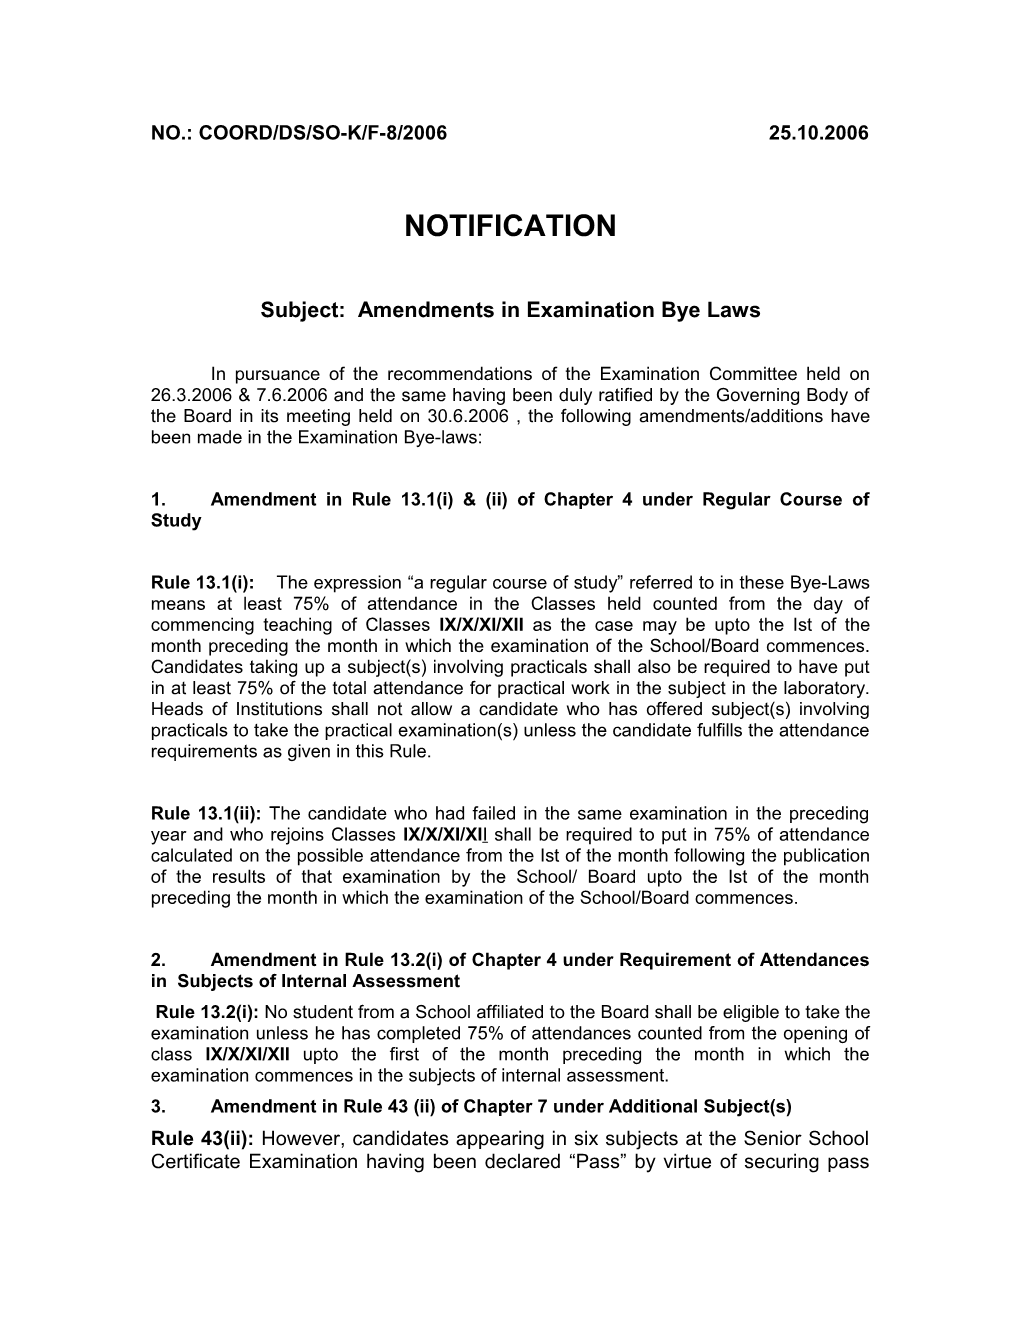 Subject: Amendments in Examination Bye Laws